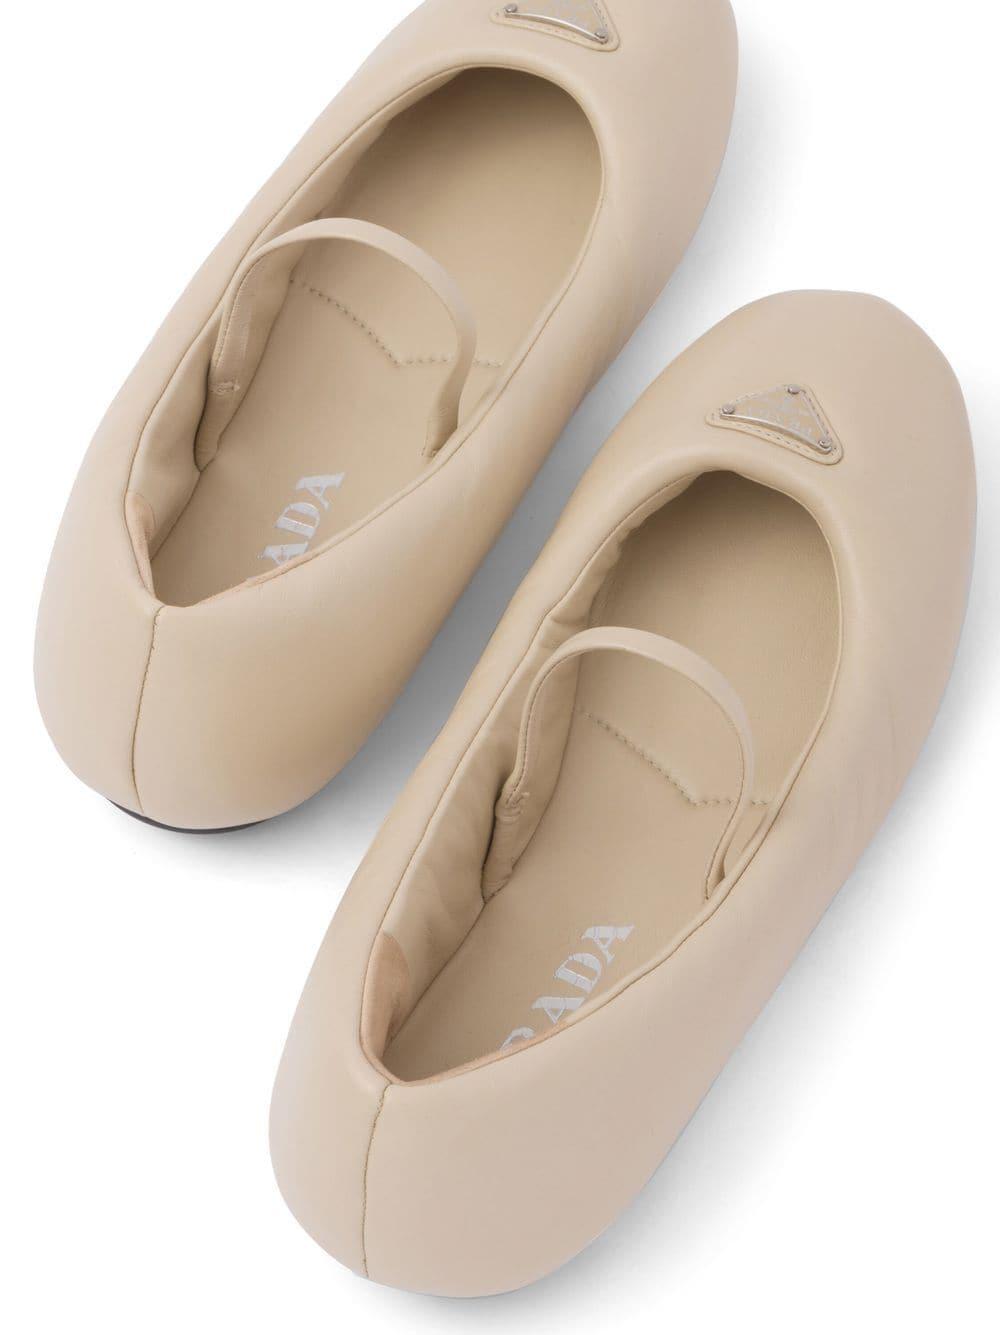 Prada Soft Padded Leather Ballerinas in Natural | Lyst